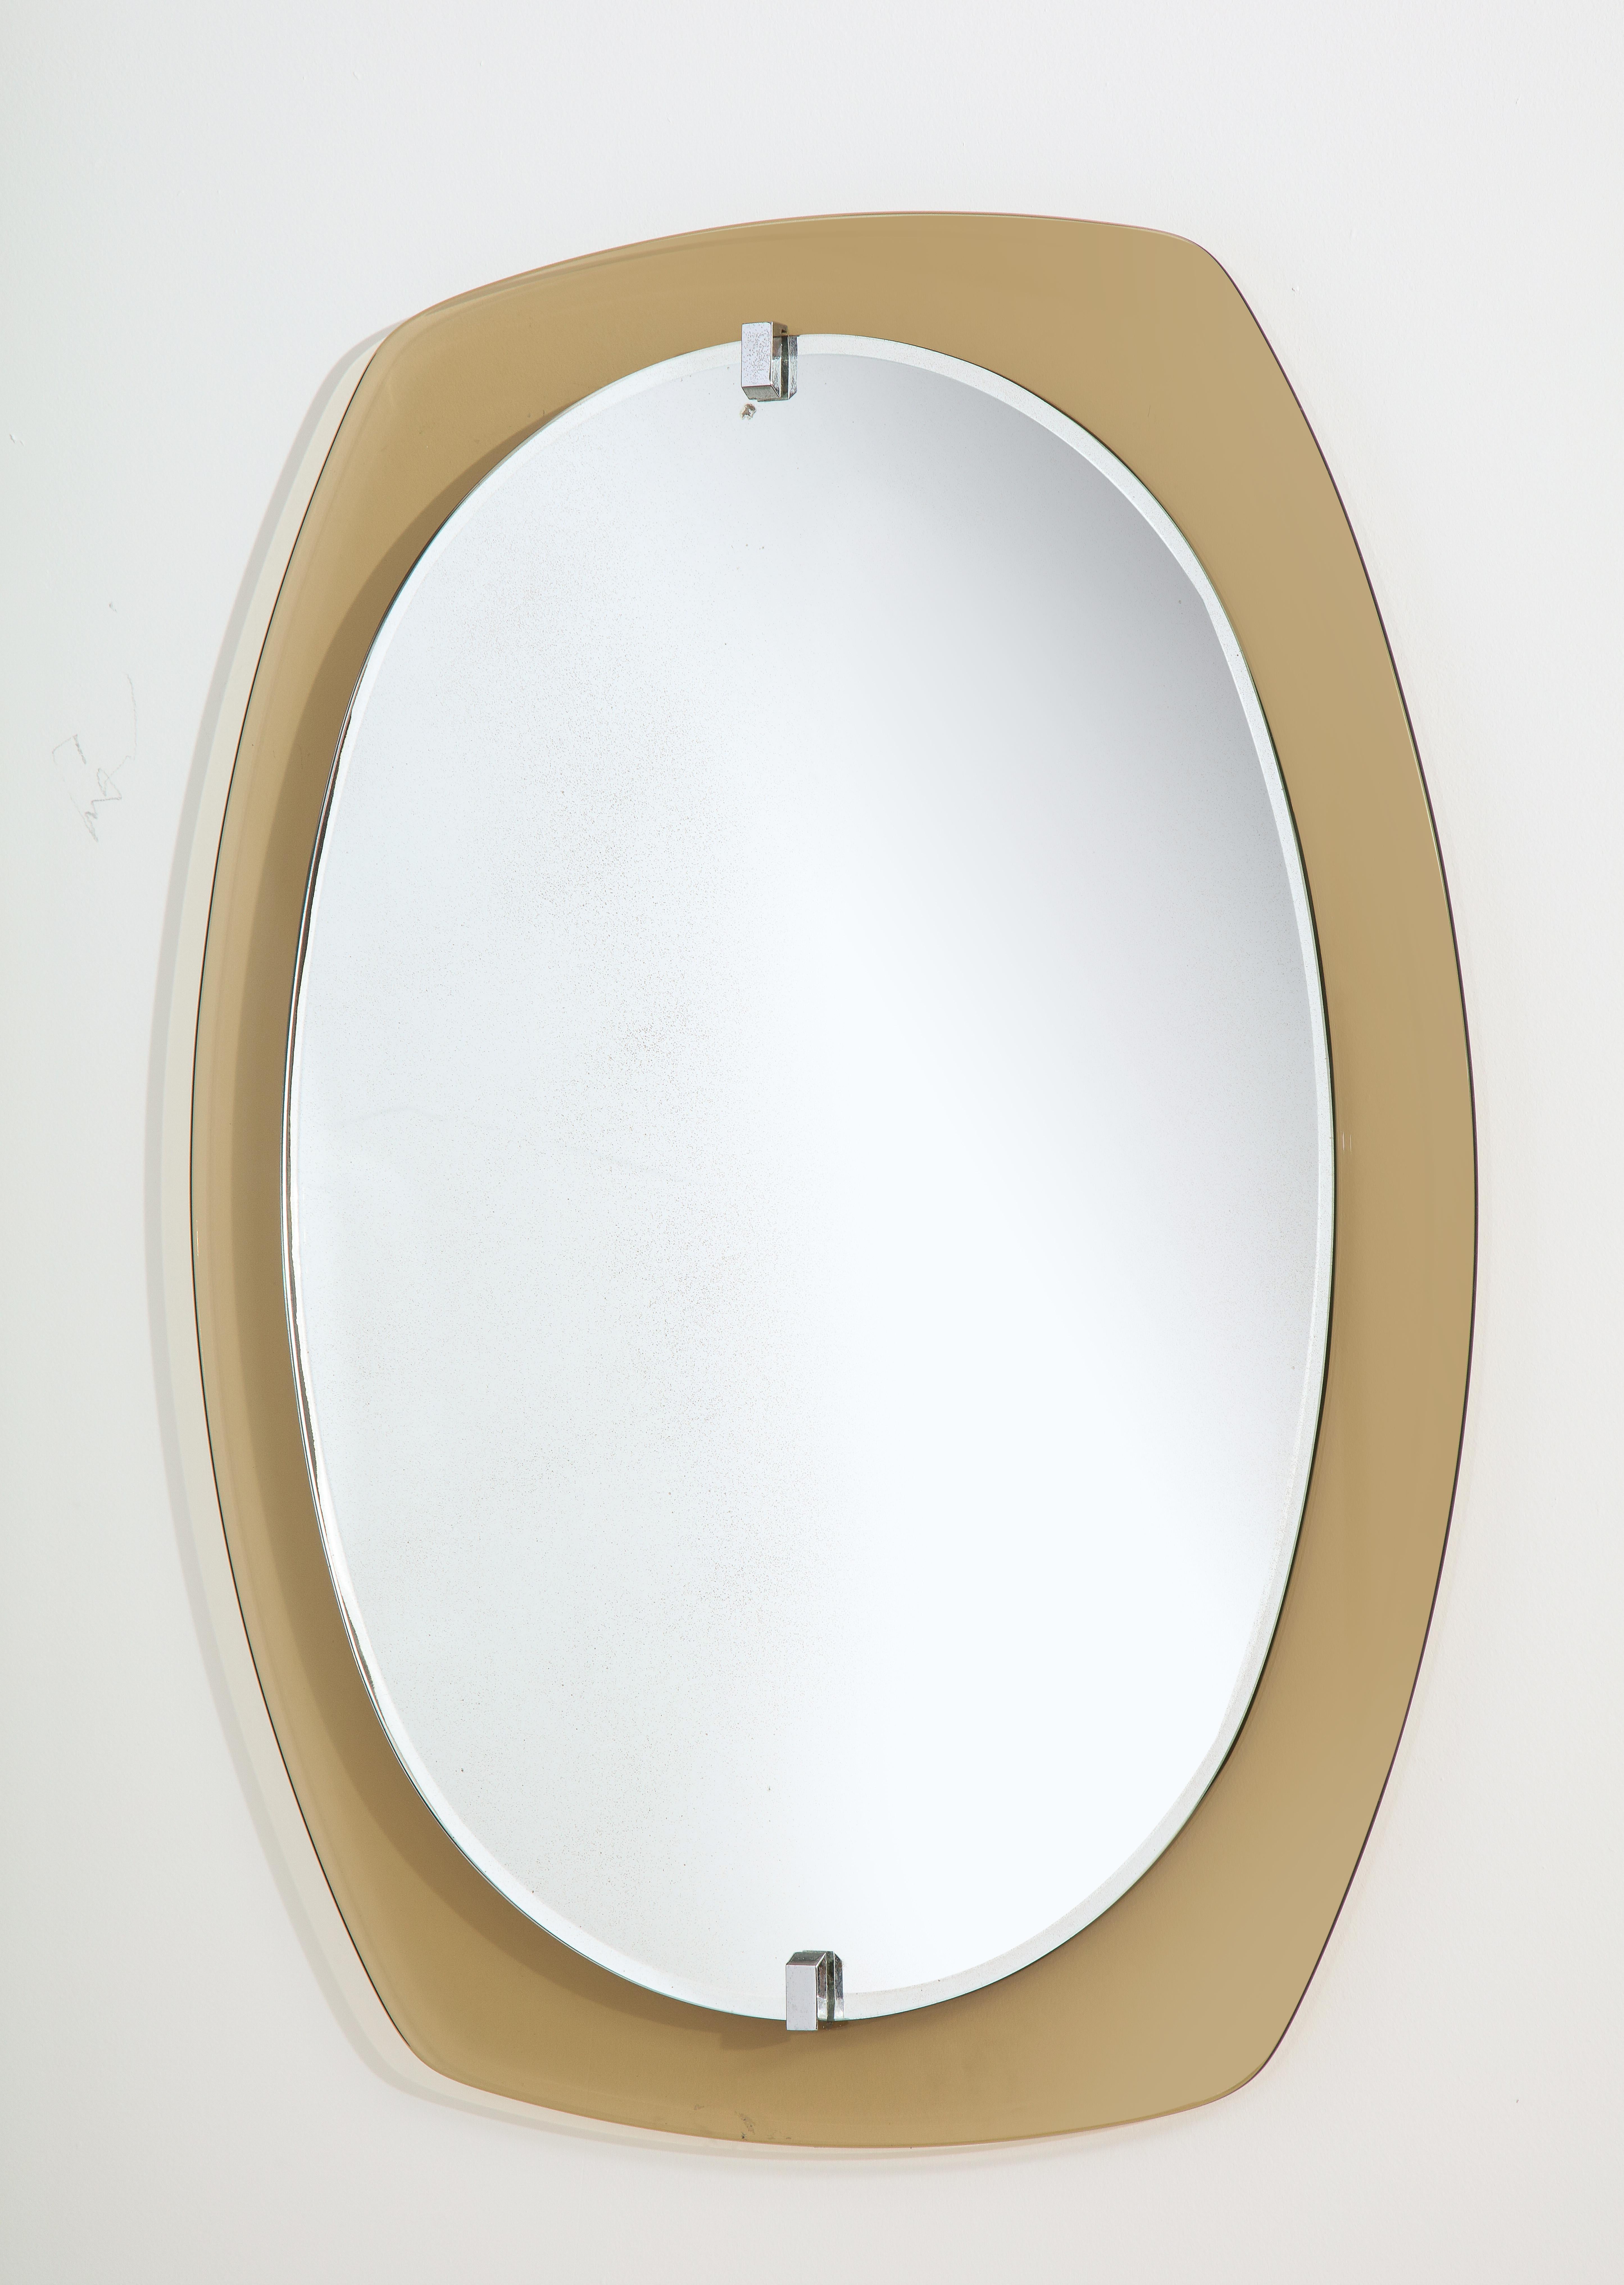 An Italian beveled smoked and clear glass mirror, produced in the 1960's by the famous Italian company Veca. The inner clear glass is raised from the smoked glass border by clasps in nickel-plated brass. making it appear as if it is floating. The